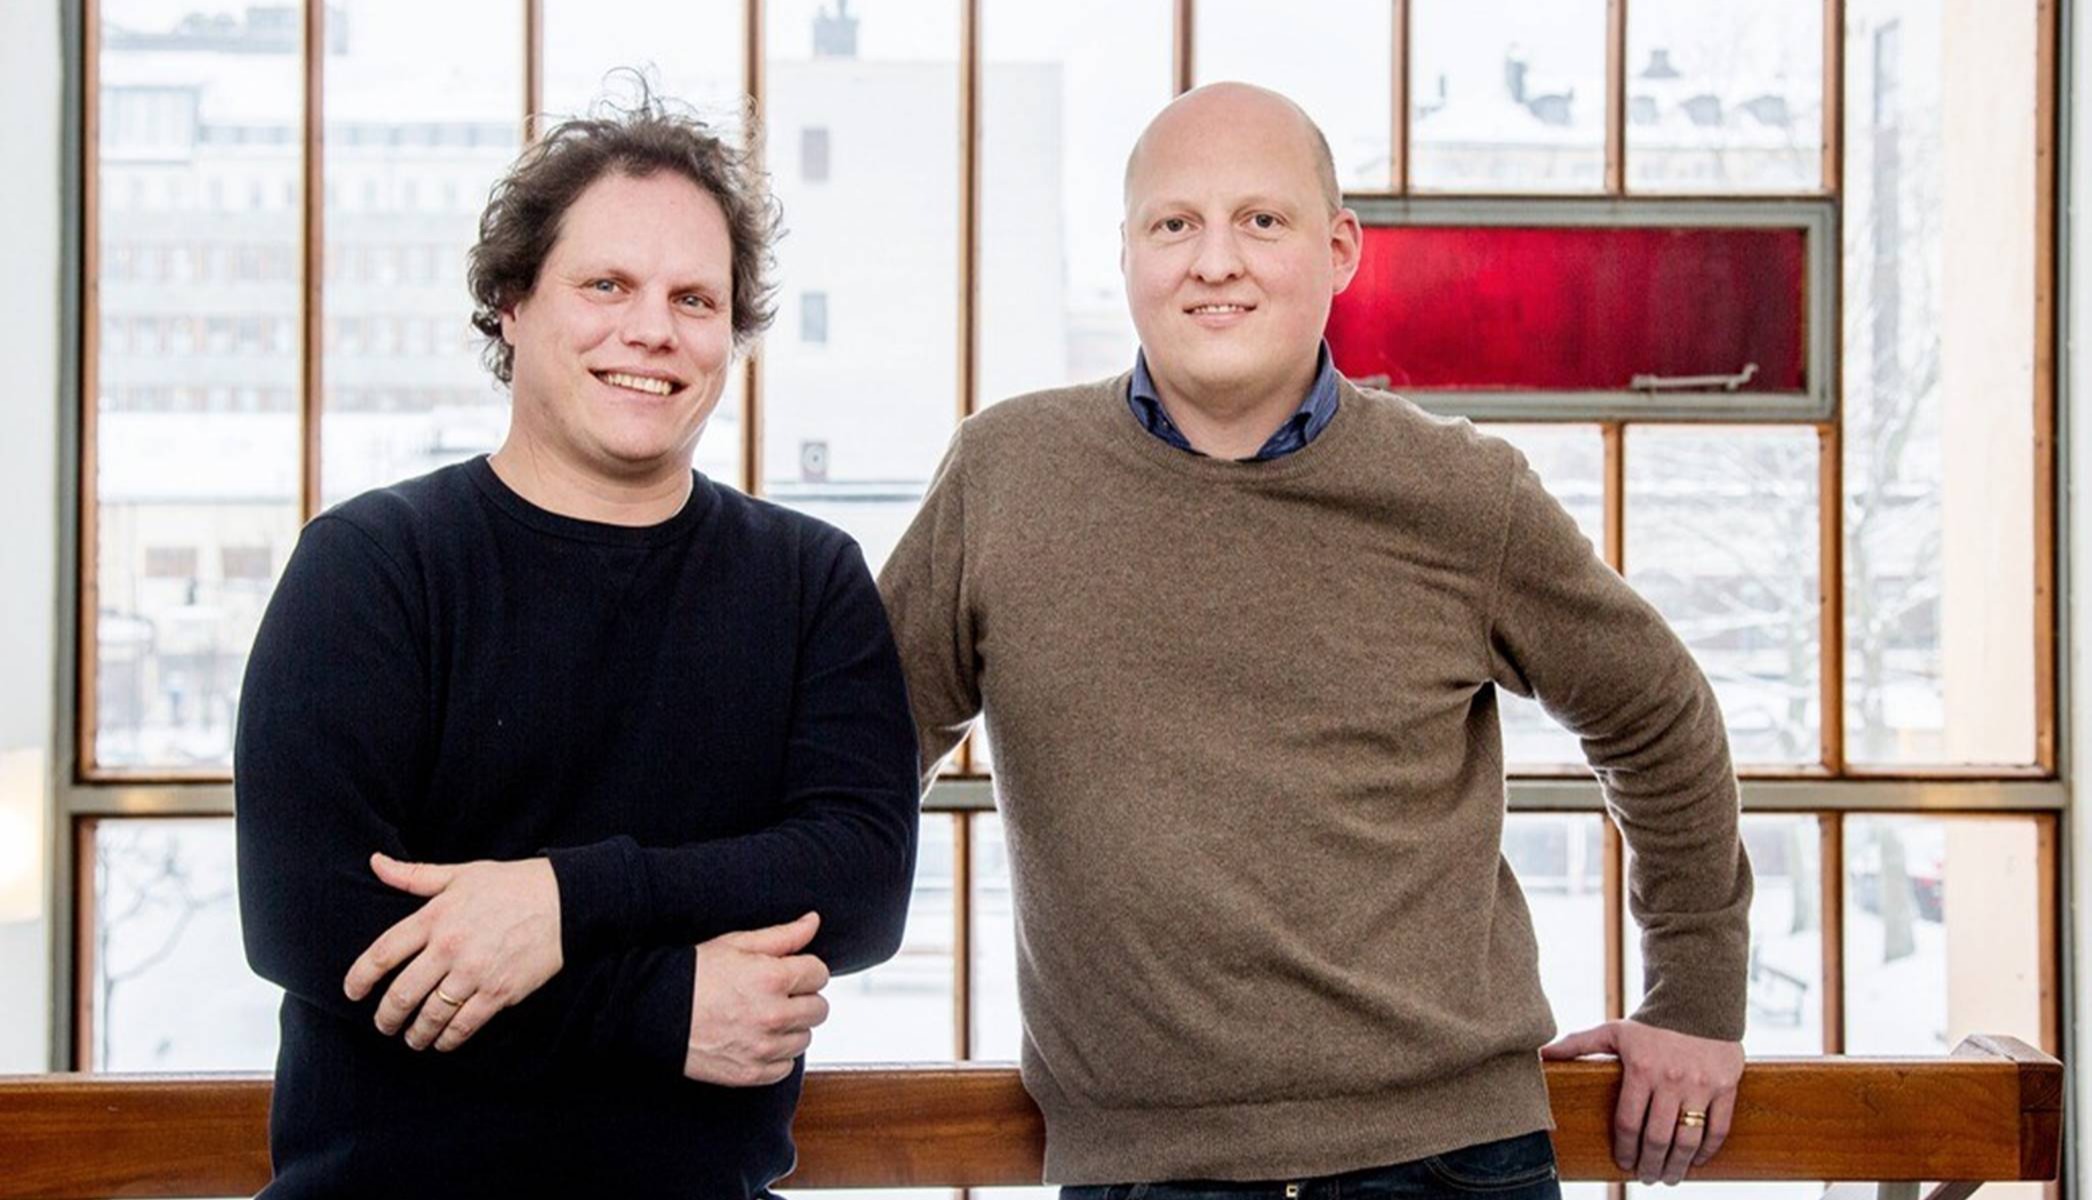 An image of Gustav and Mattias – the researchers and founders behind Lexplore